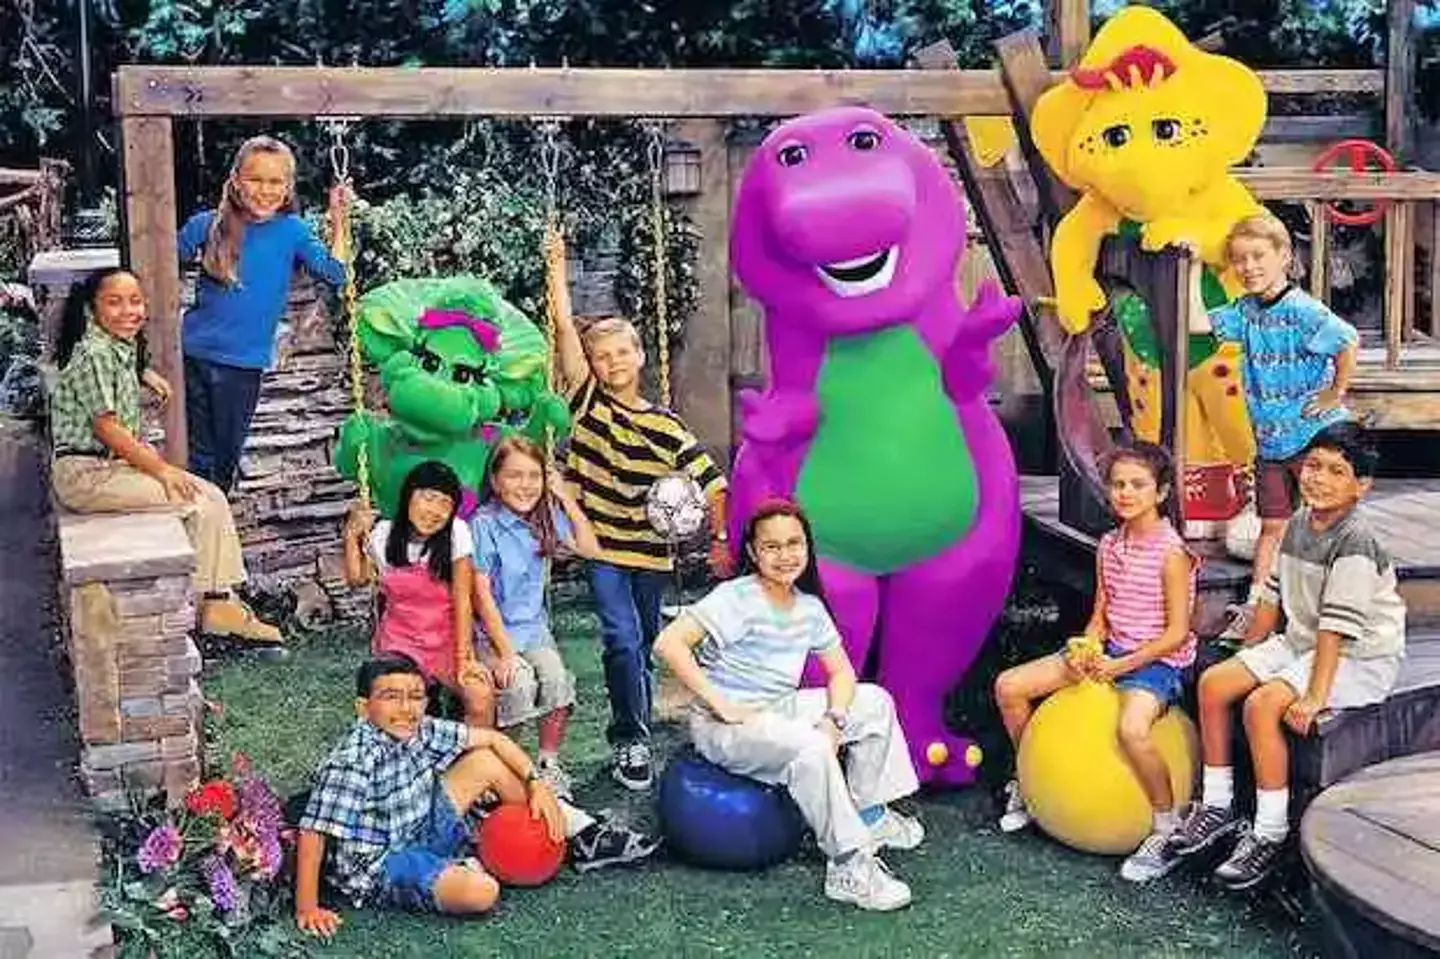 Barney and Friends premiered back in 1992.